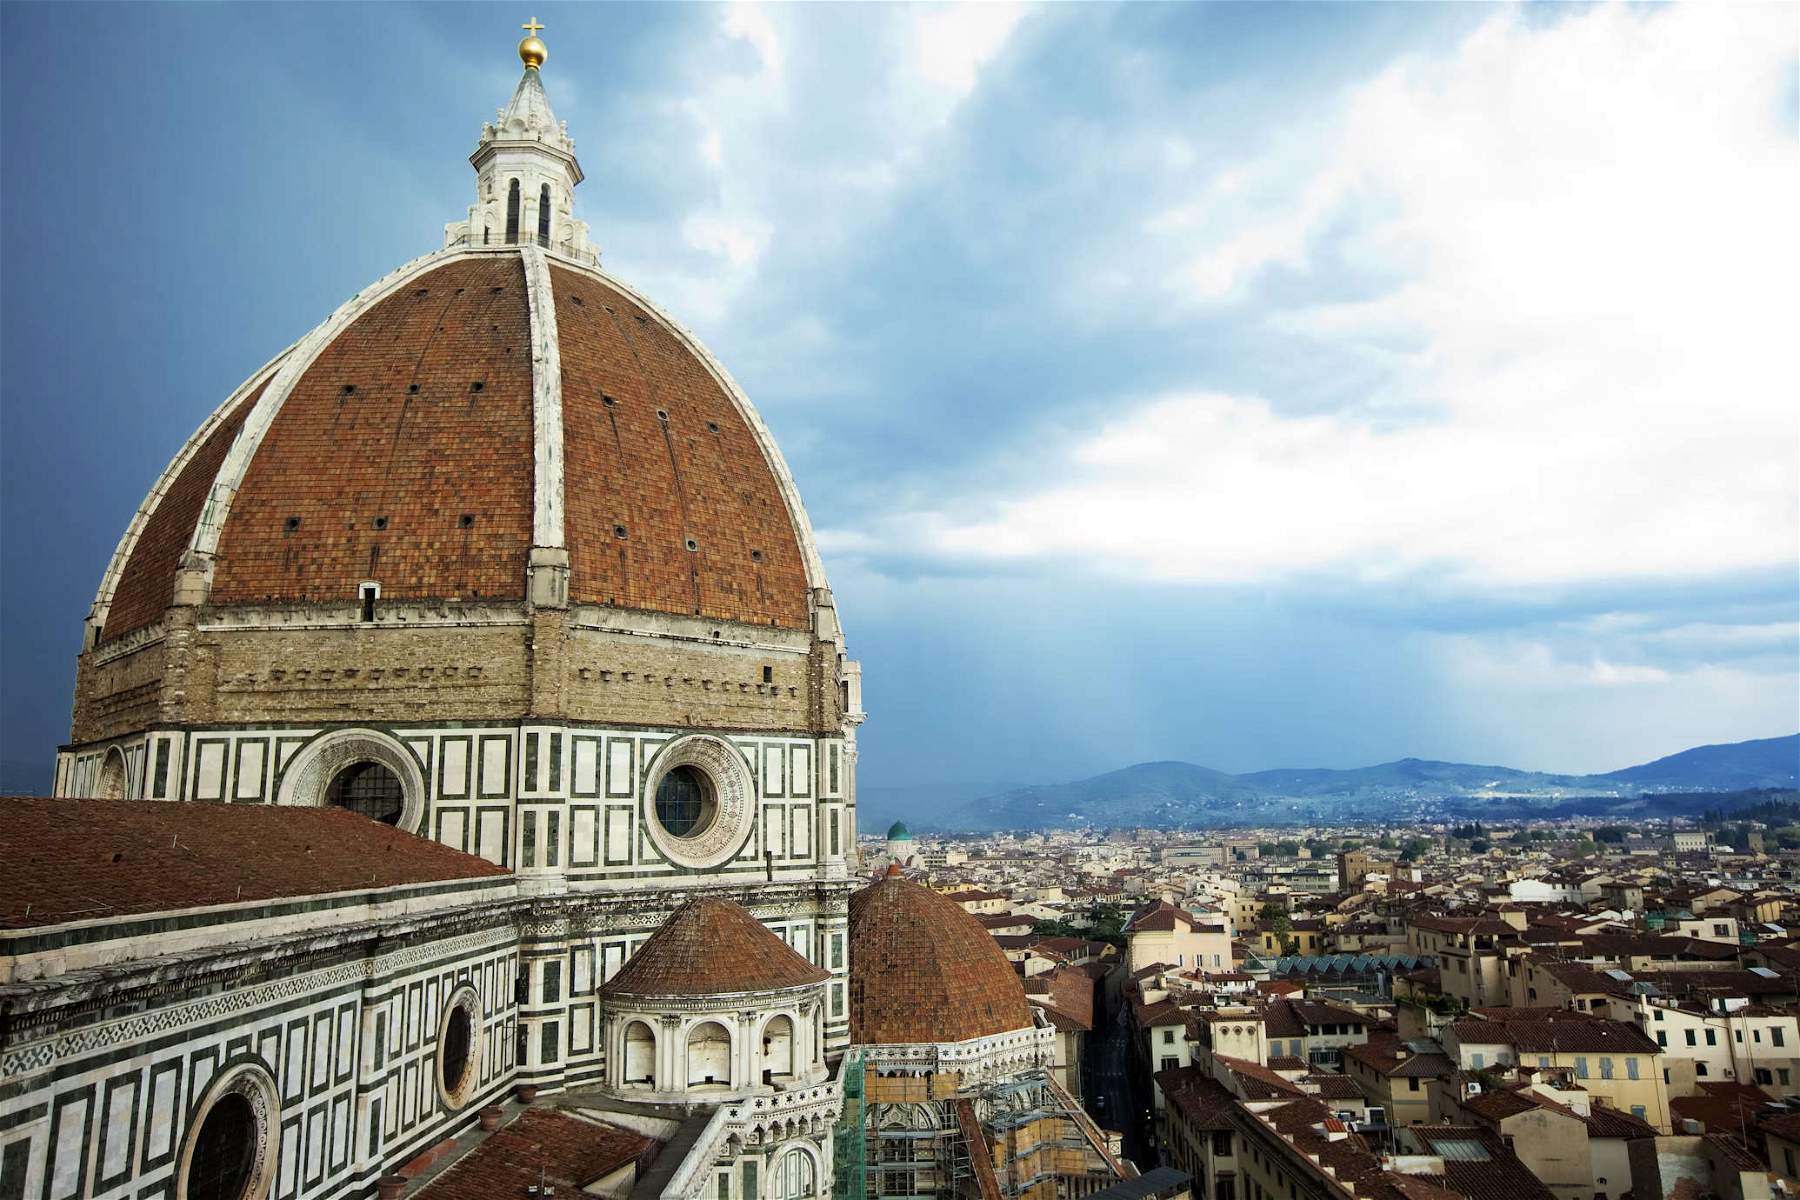 Dirty visitors: a tourist defecates on the stairs of Brunelleschi's dome